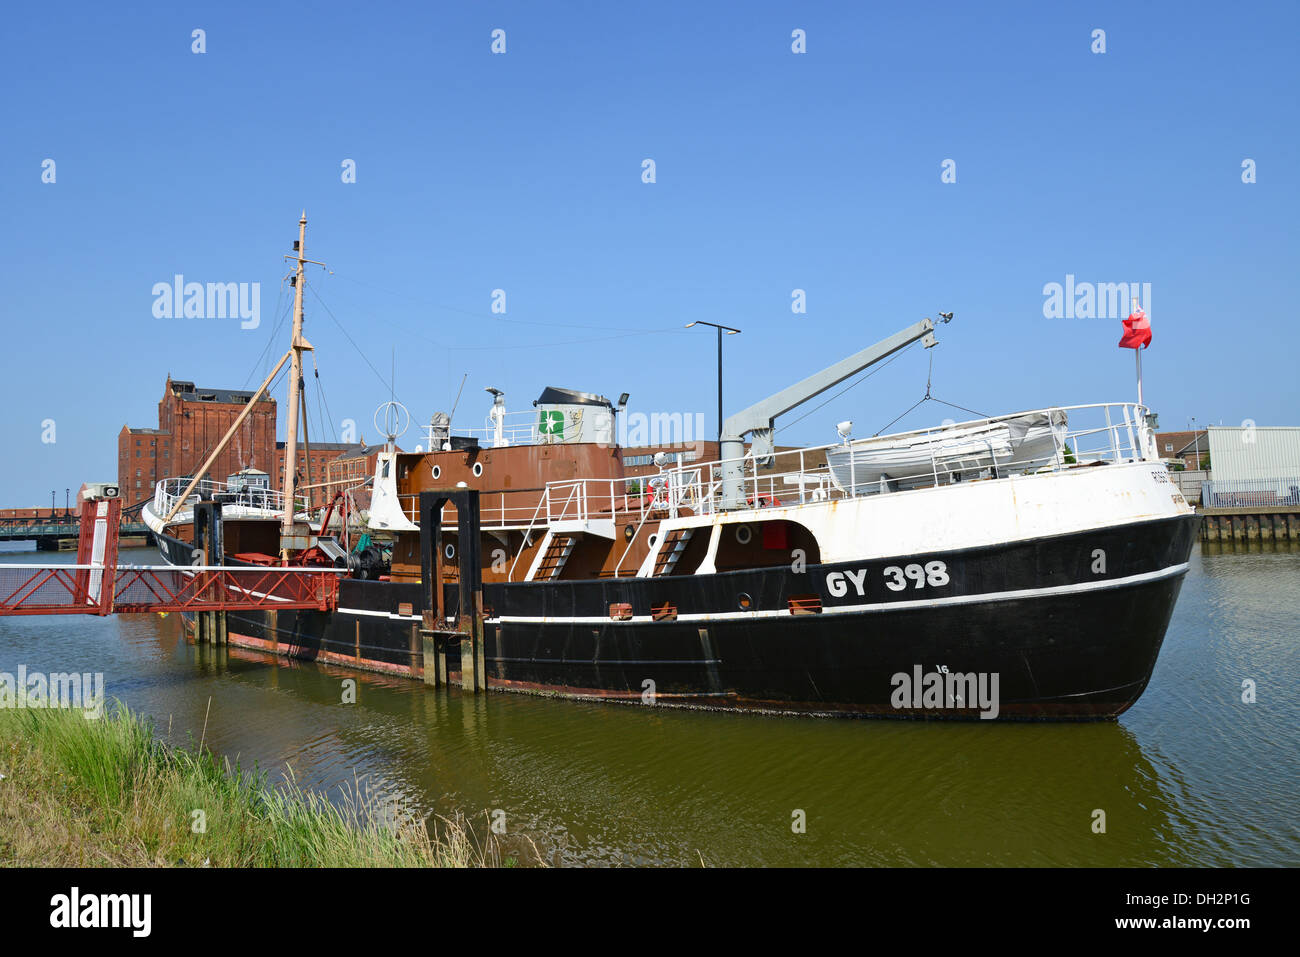 Ross Tiger GY398 classe chat trawler à Alexander Dock, Grimsby, Lincolnshire, Angleterre, Royaume-Uni Banque D'Images